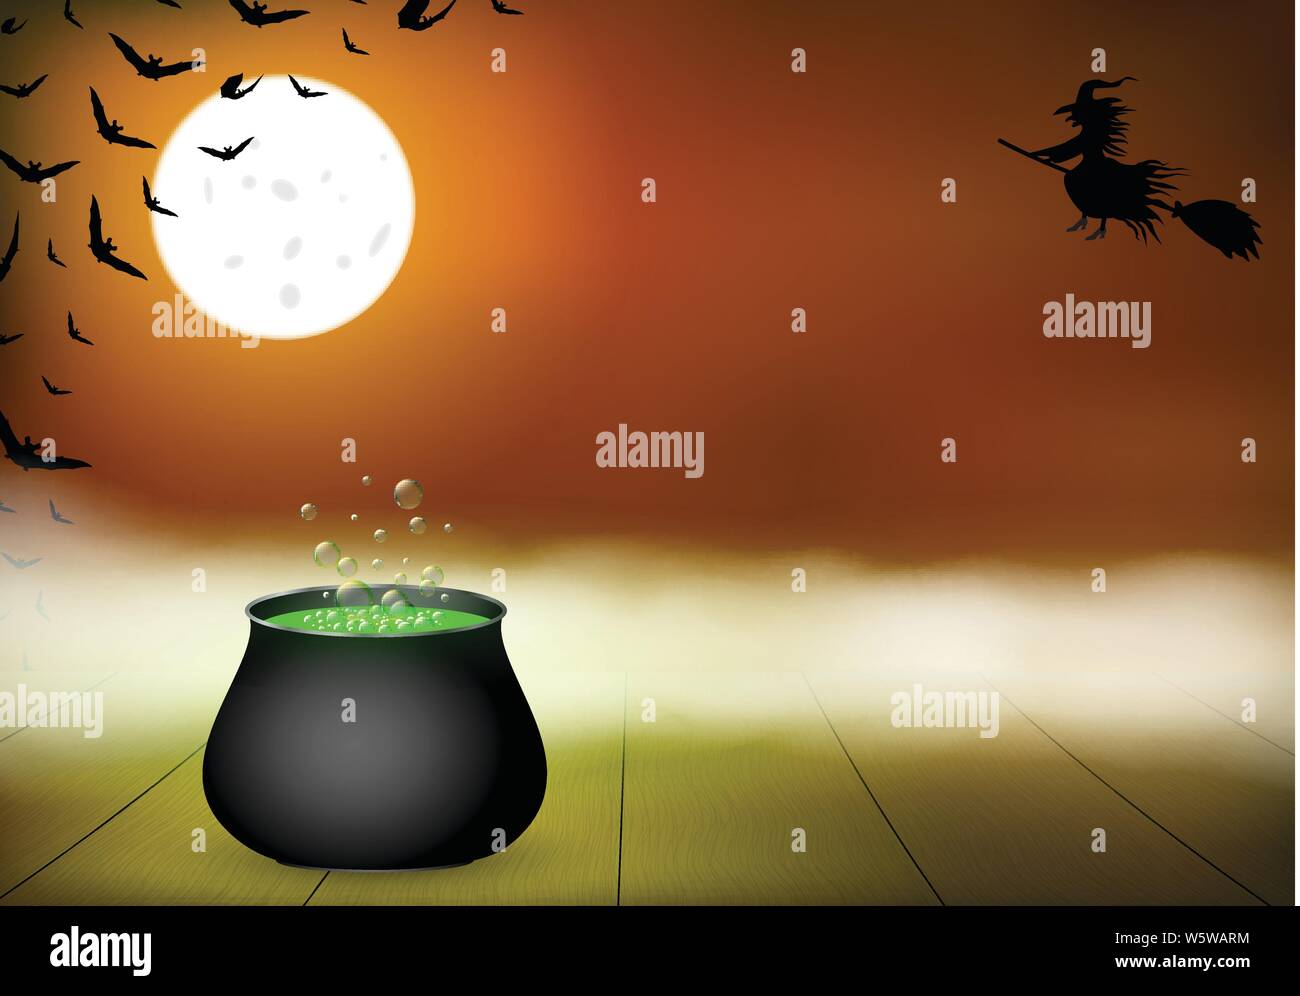 Halloween background with witch, bats, cauldron. Stock Vector